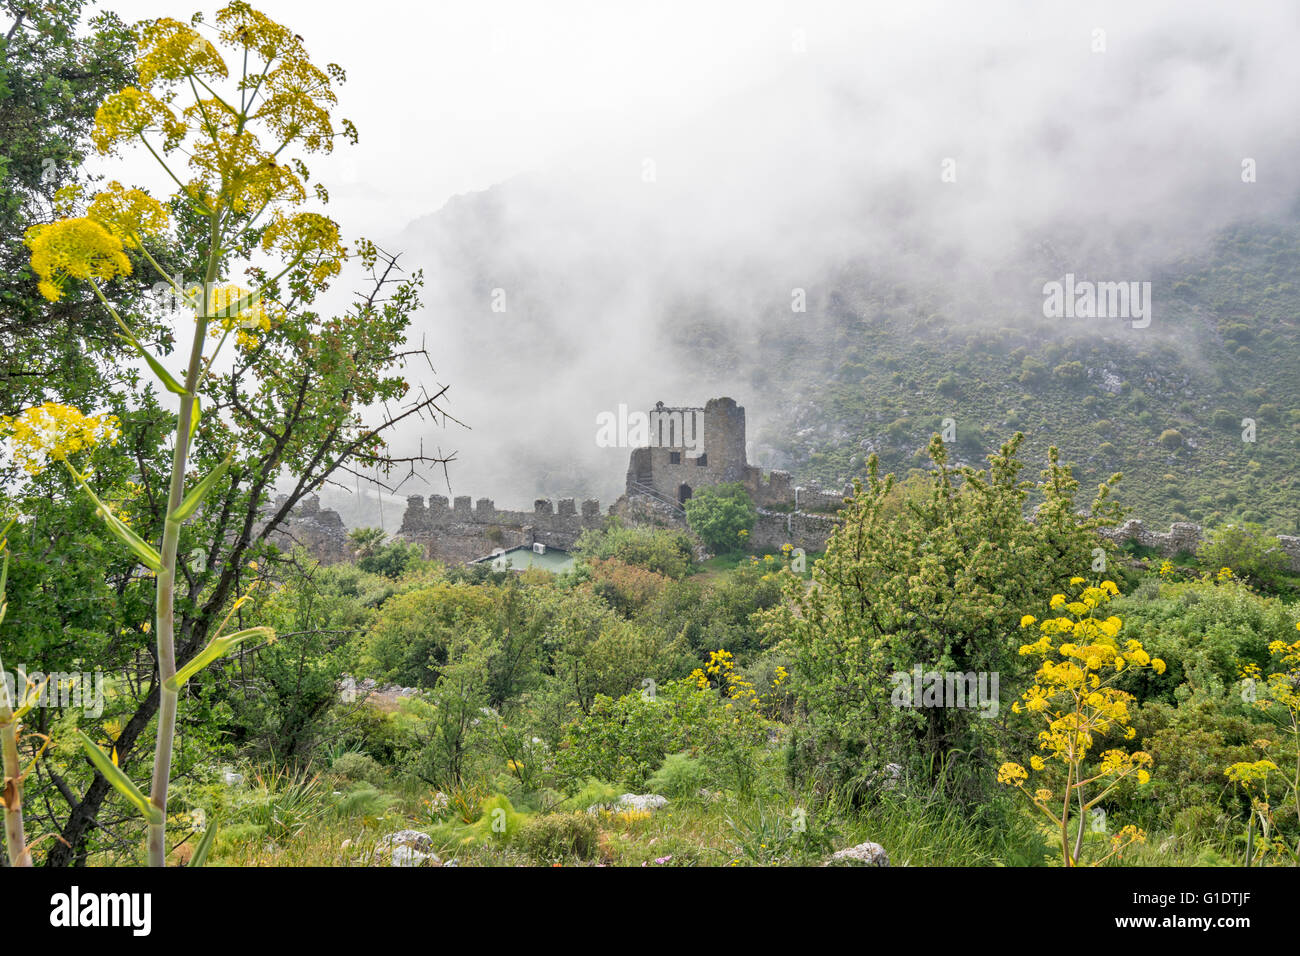 NORTH CYPRUS SAINT HILARION CASTLE THE YELLOW FLOWERS OF WILD FENNEL AND MIST MOVING OVER THE ENTRANCE TOWER Stock Photo